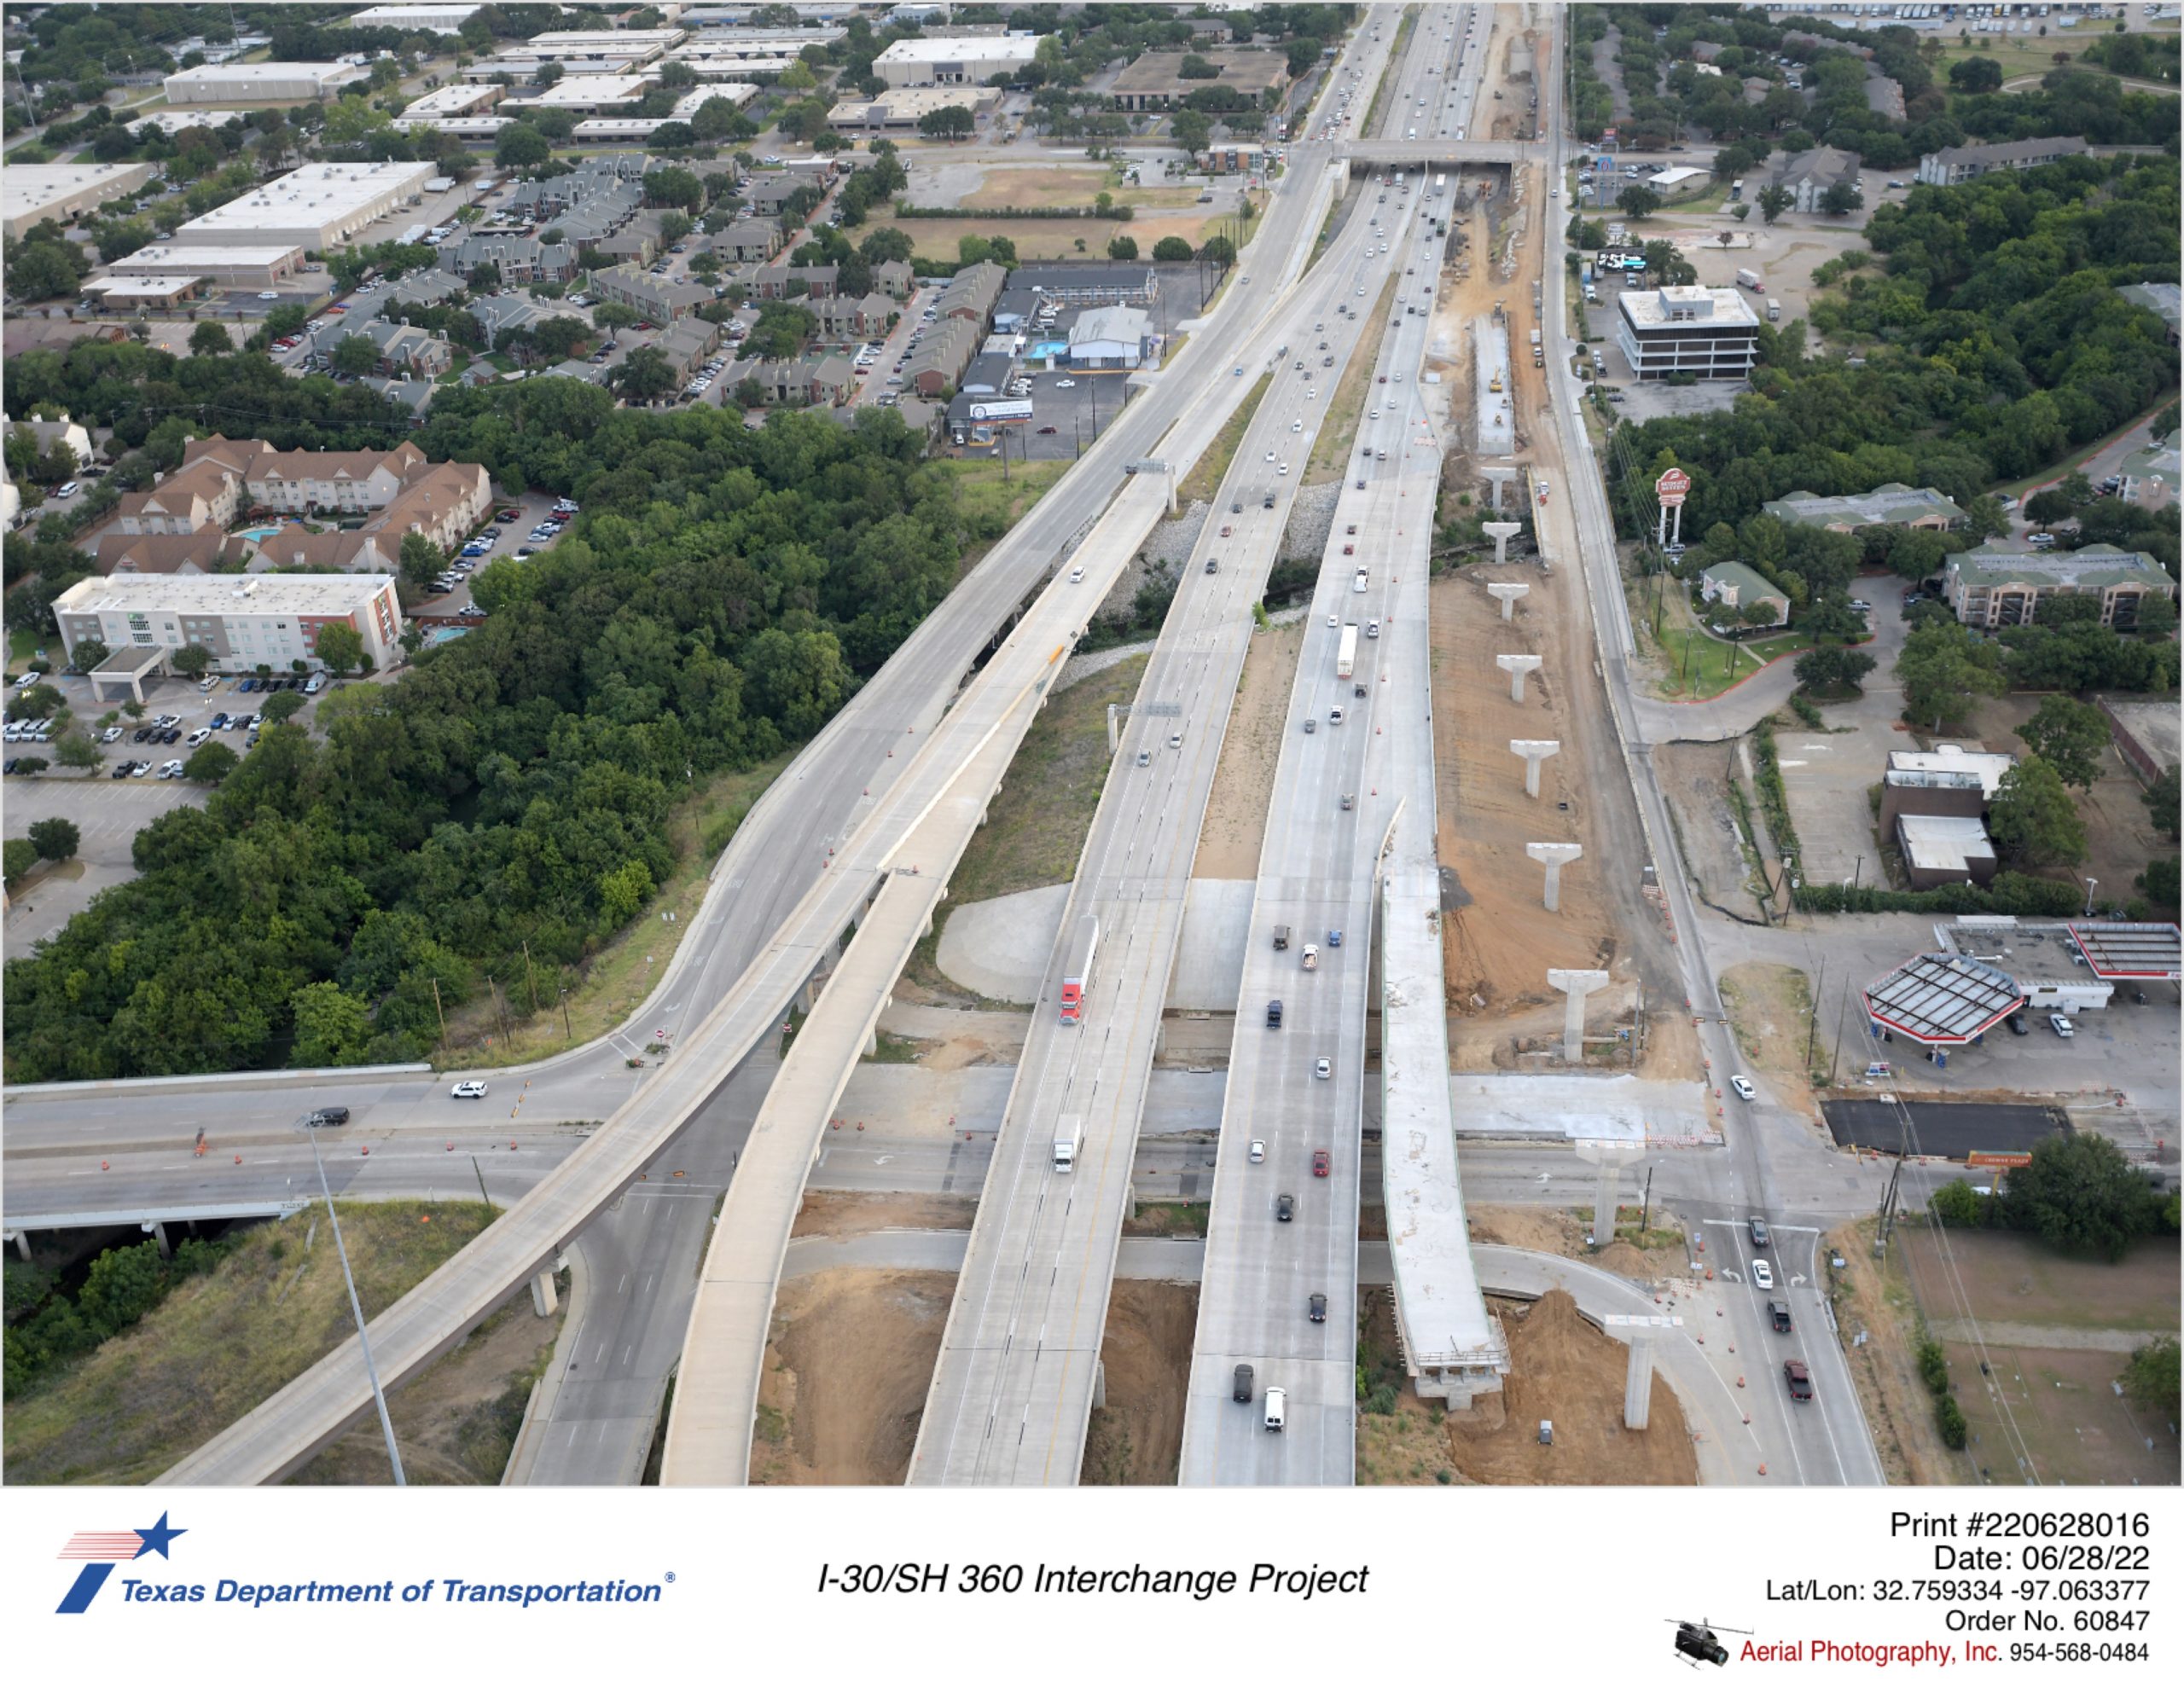 SH 360 looking north over Lamar Blvd. Construction of northbound frontage road and direct connectors is shown.